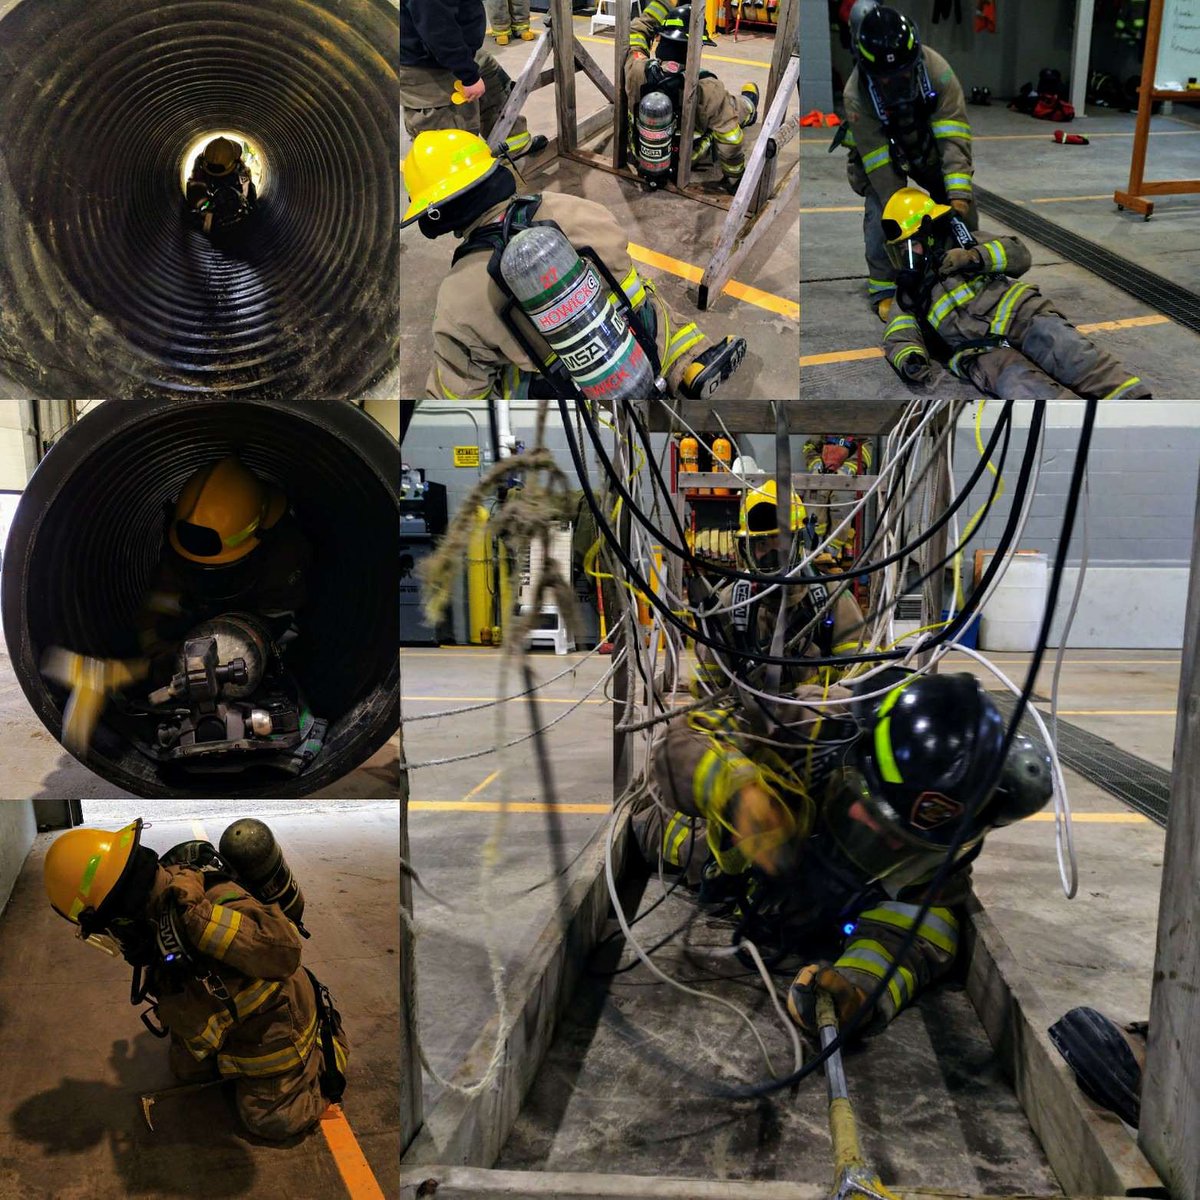 @HowickFire Recruit Class 2021 working hard today on SCBA Proficiency, Firefighter Survival, Maydays, Drags &Carries. Working towards NFPA 1001 certification. #professionalvolunteers 🚒